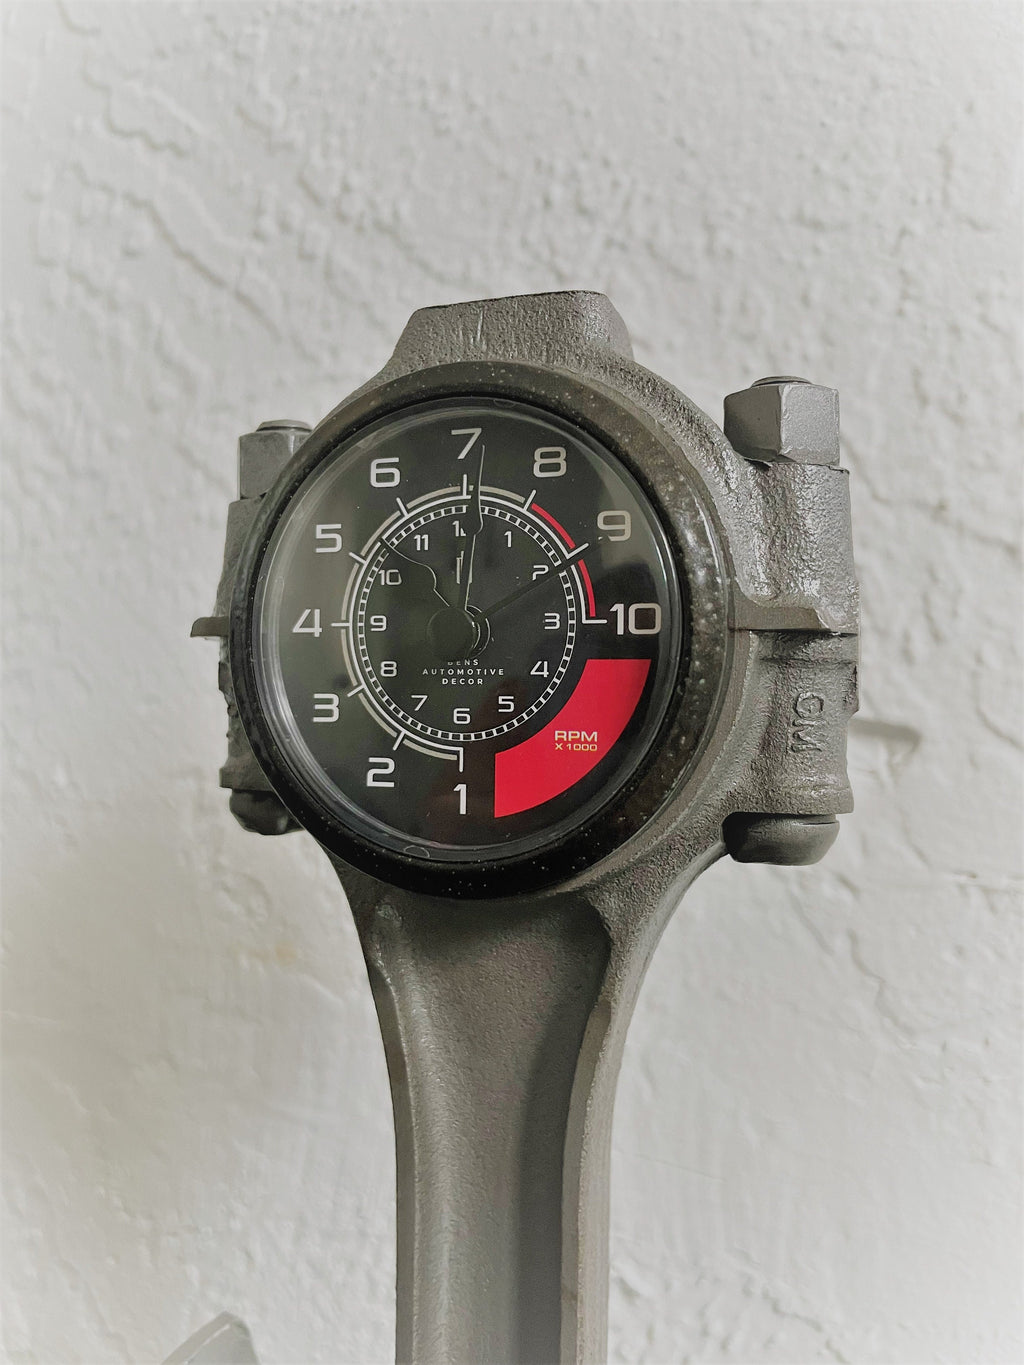 Close-up view of a car piston clock finished in gunmetal gray with a black clock ring and black and red RPM clock face.